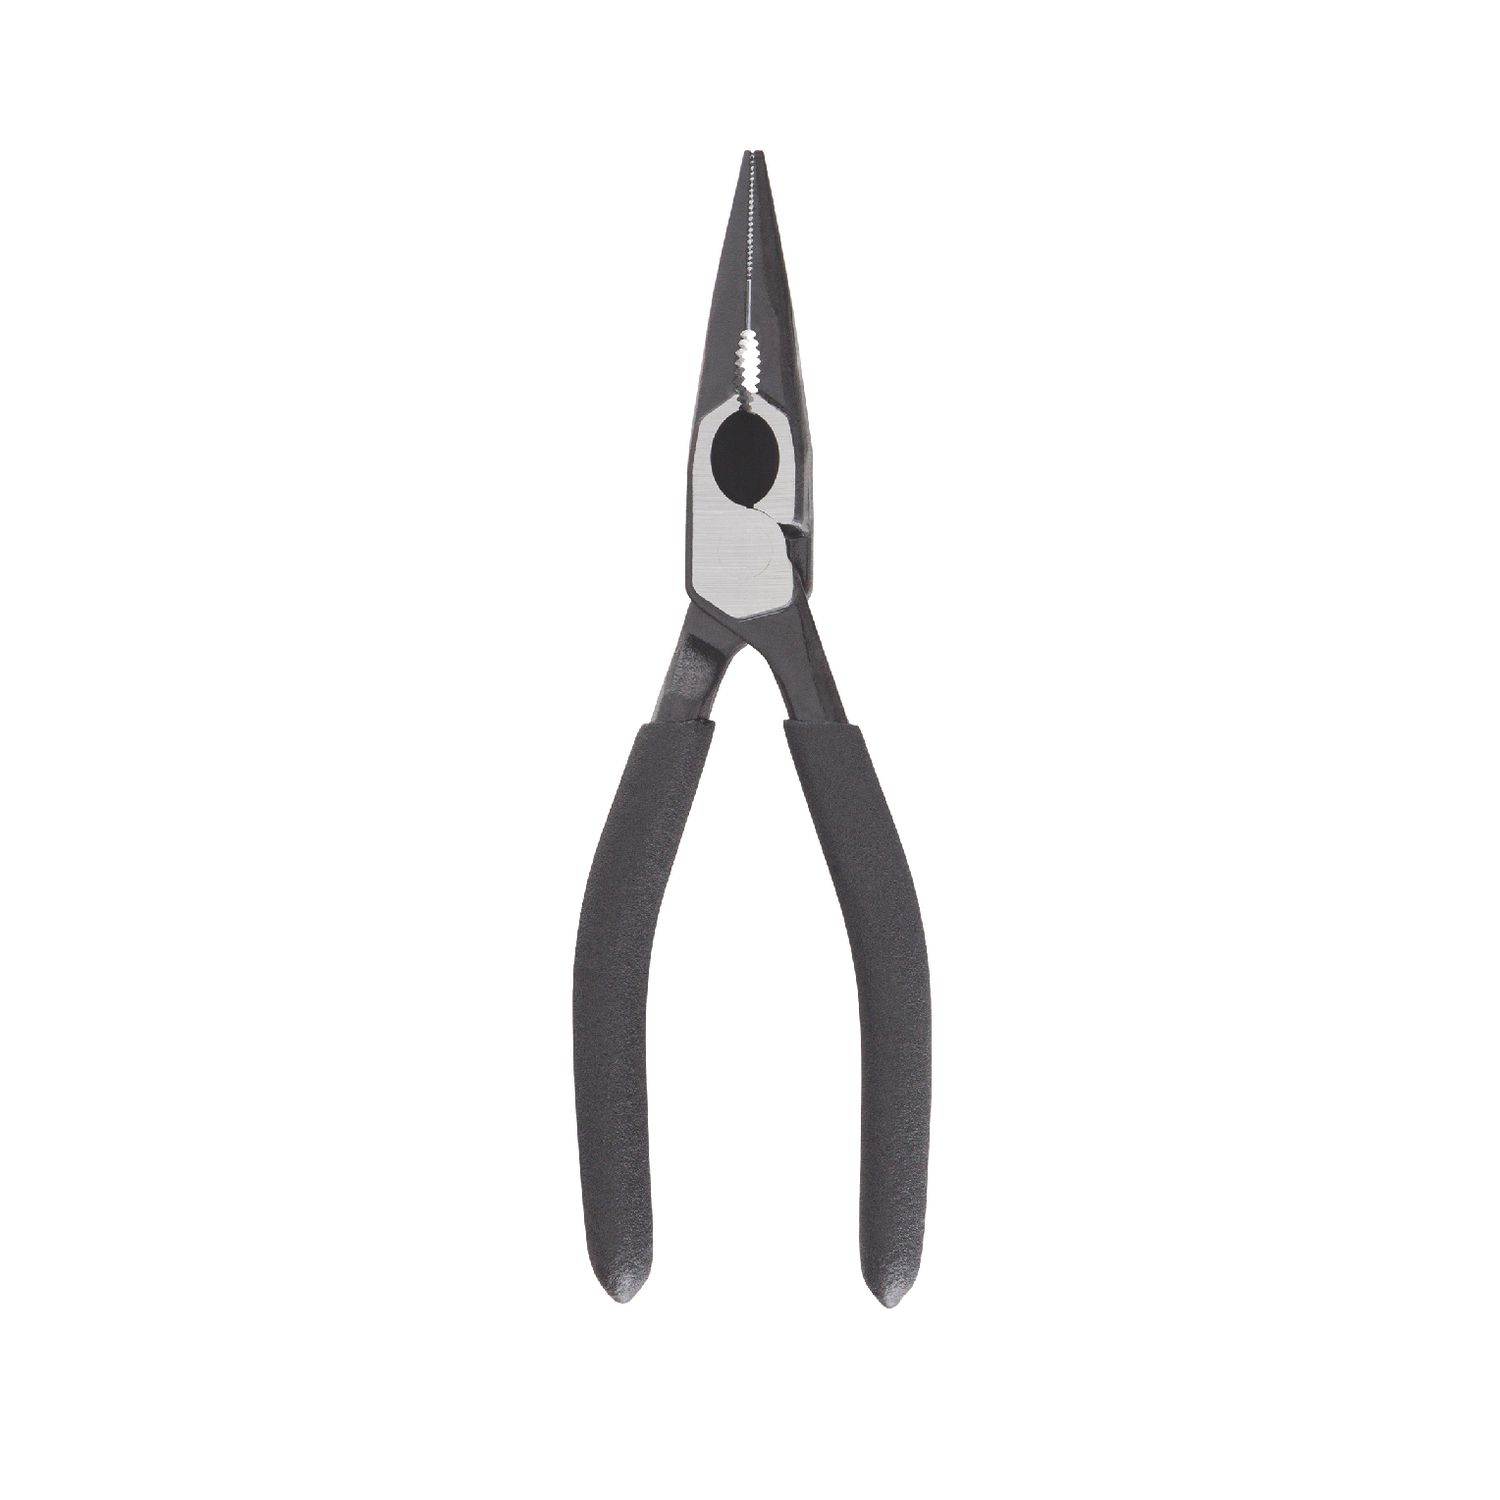 Technical Electric Long Nose Pliers Icon Outline Technical Electric Pliers  Vector Icon For Web Design Stock Illustration - Download Image Now - iStock